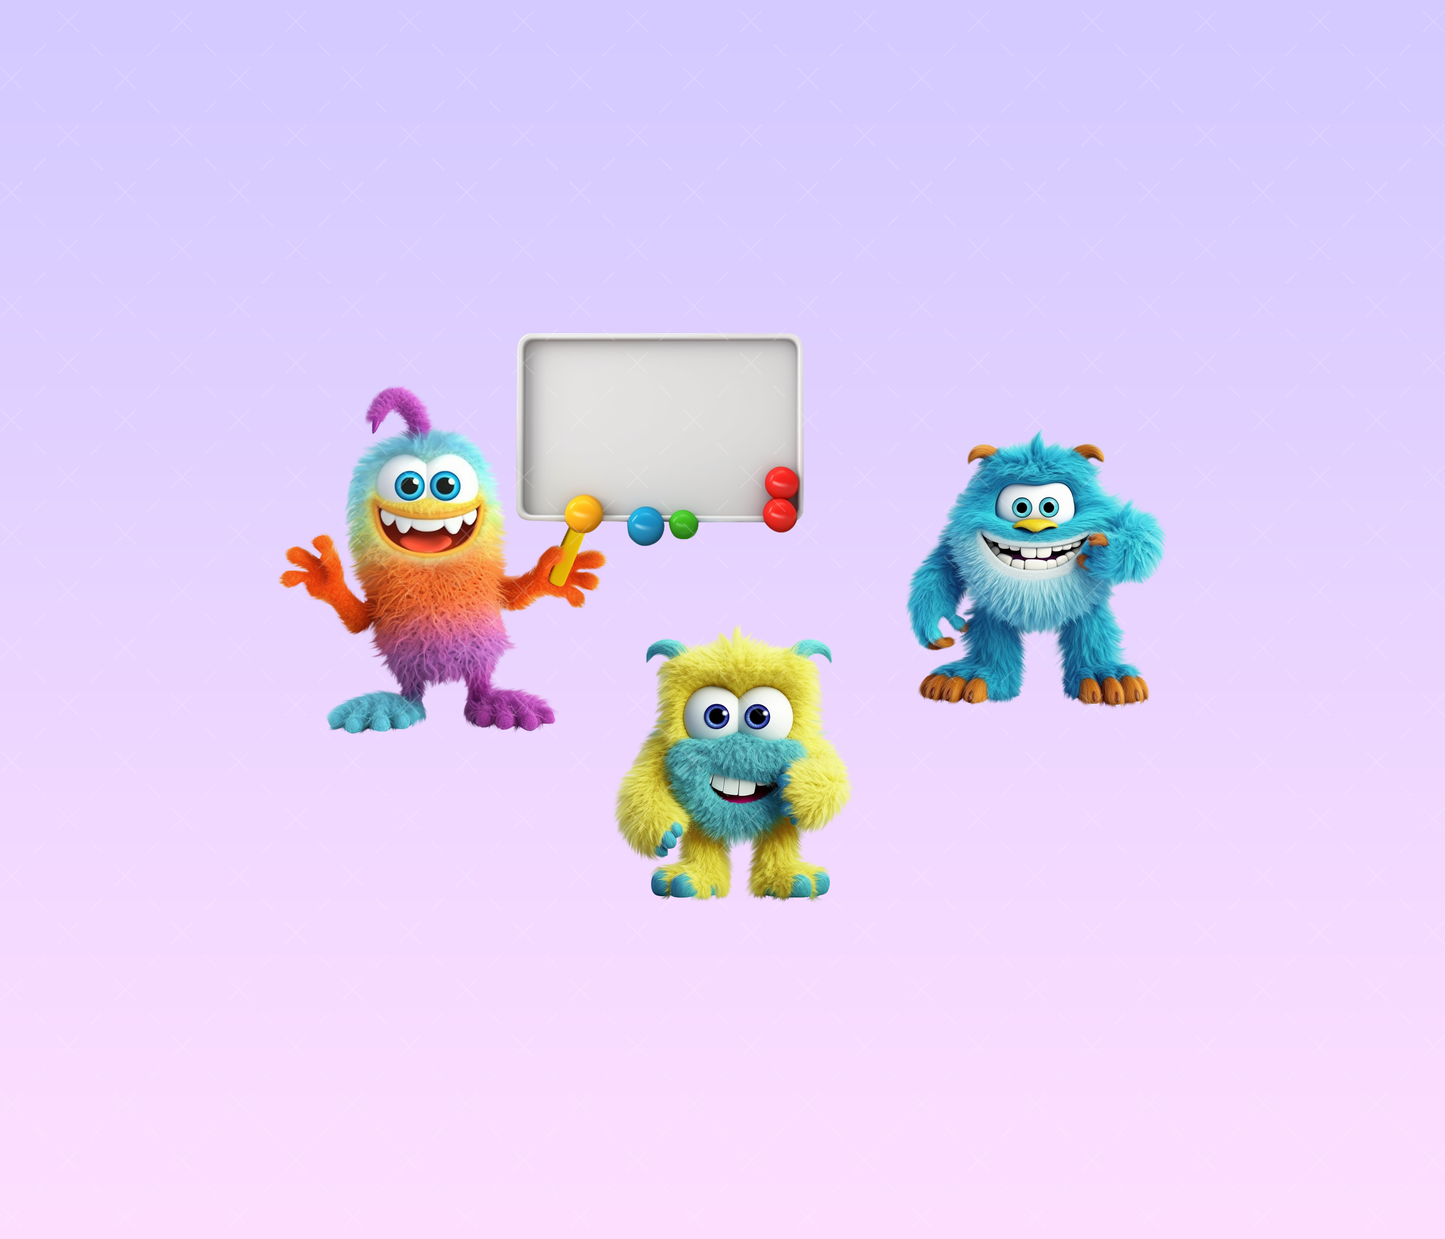 The Monsters Inc. Free Stickers